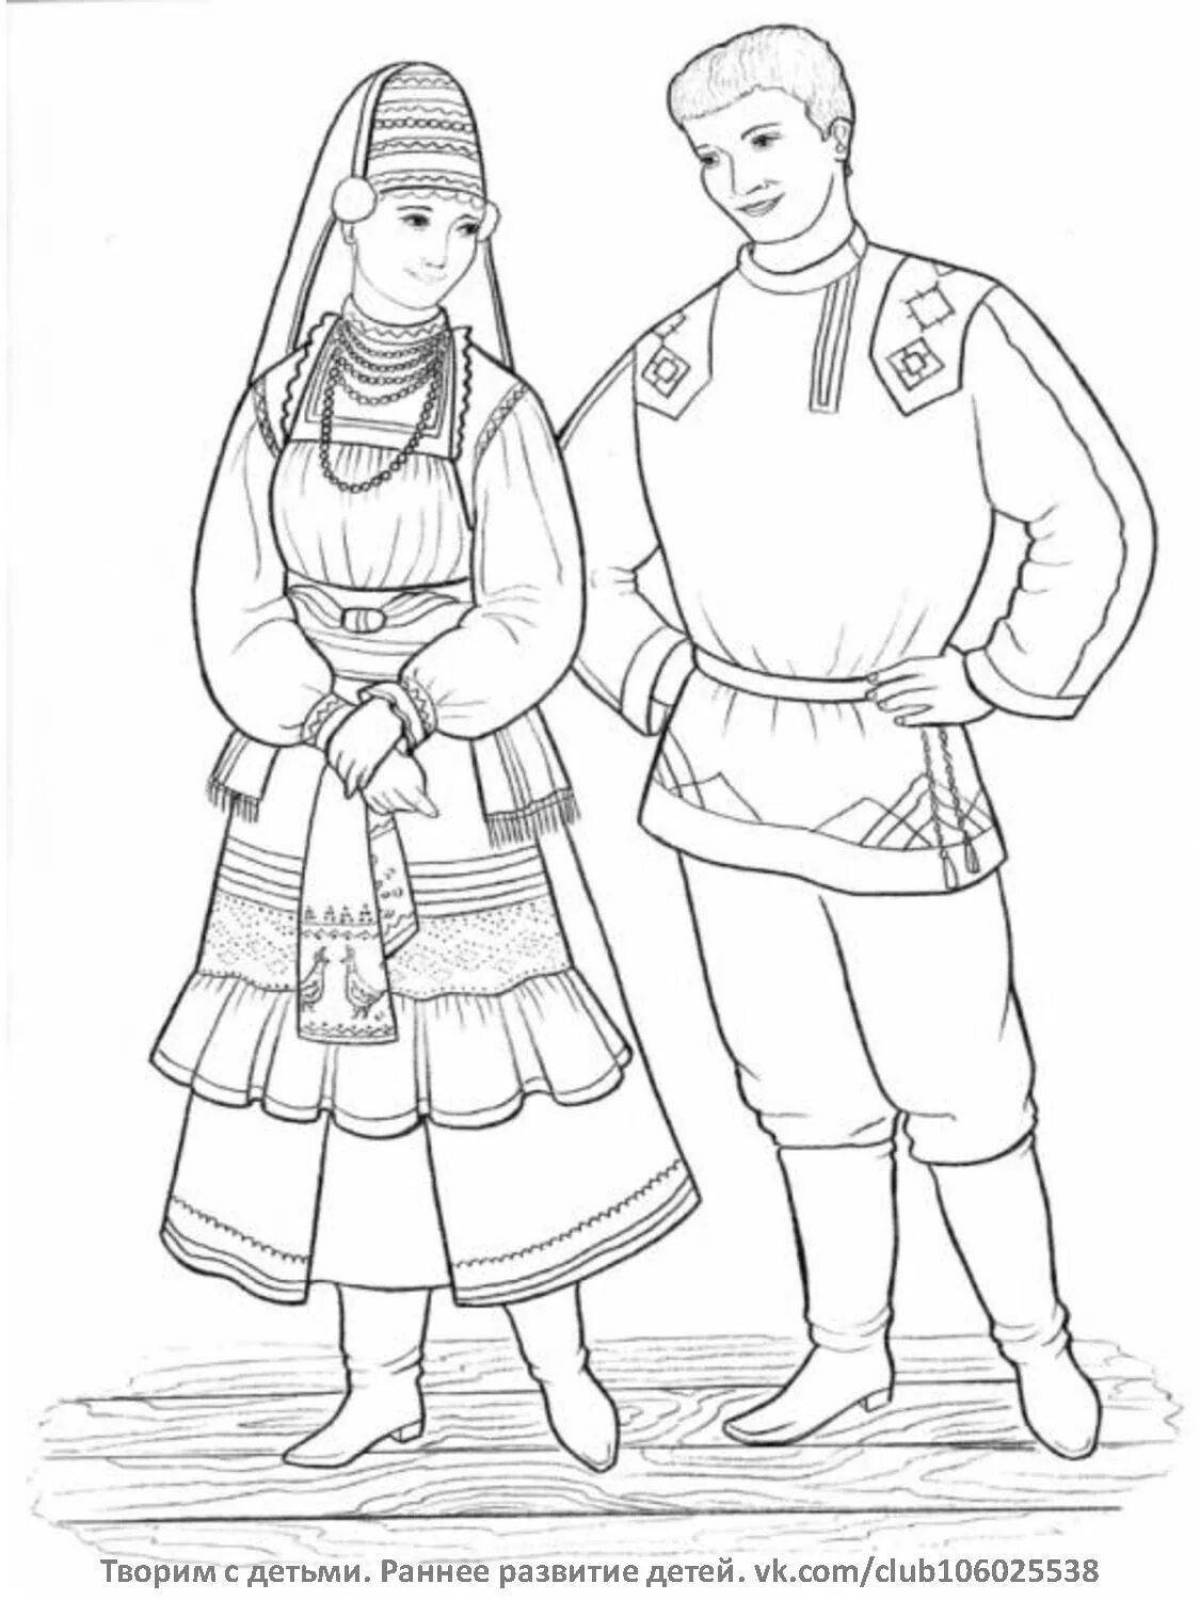 Coloring page sparkling Udmurt national costume